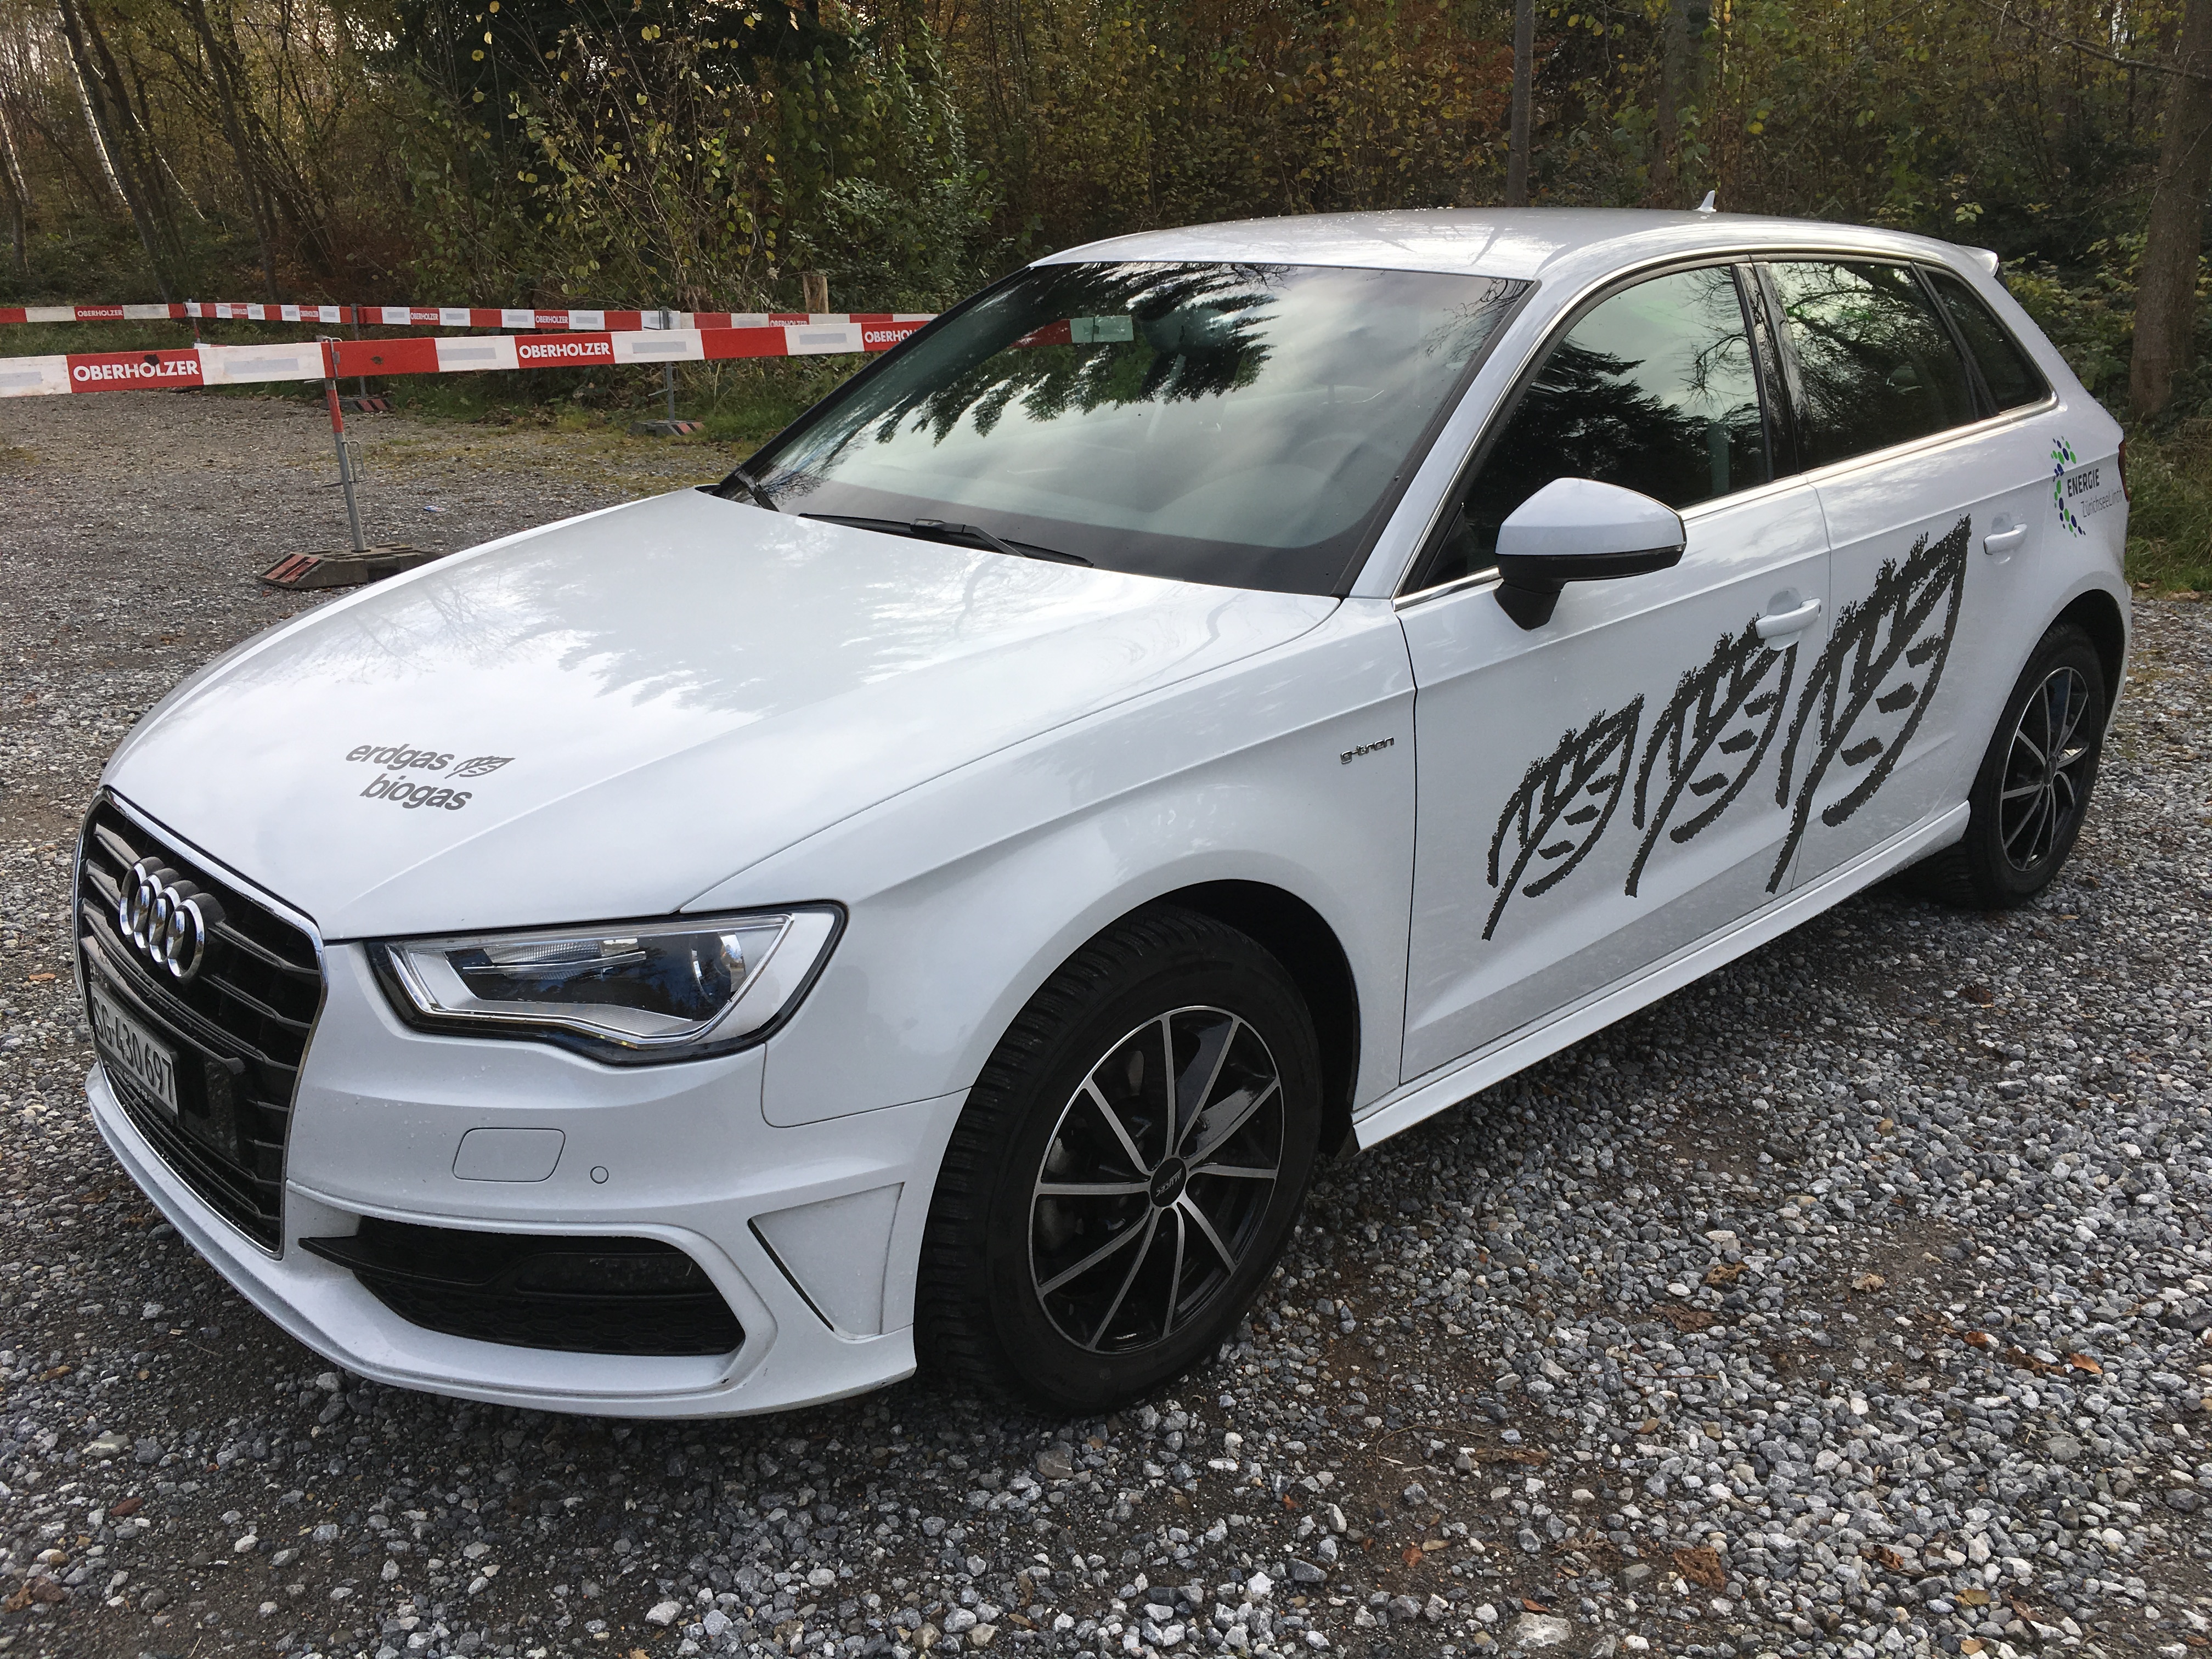 Audi A3 Sportback g-tron exterior specifications